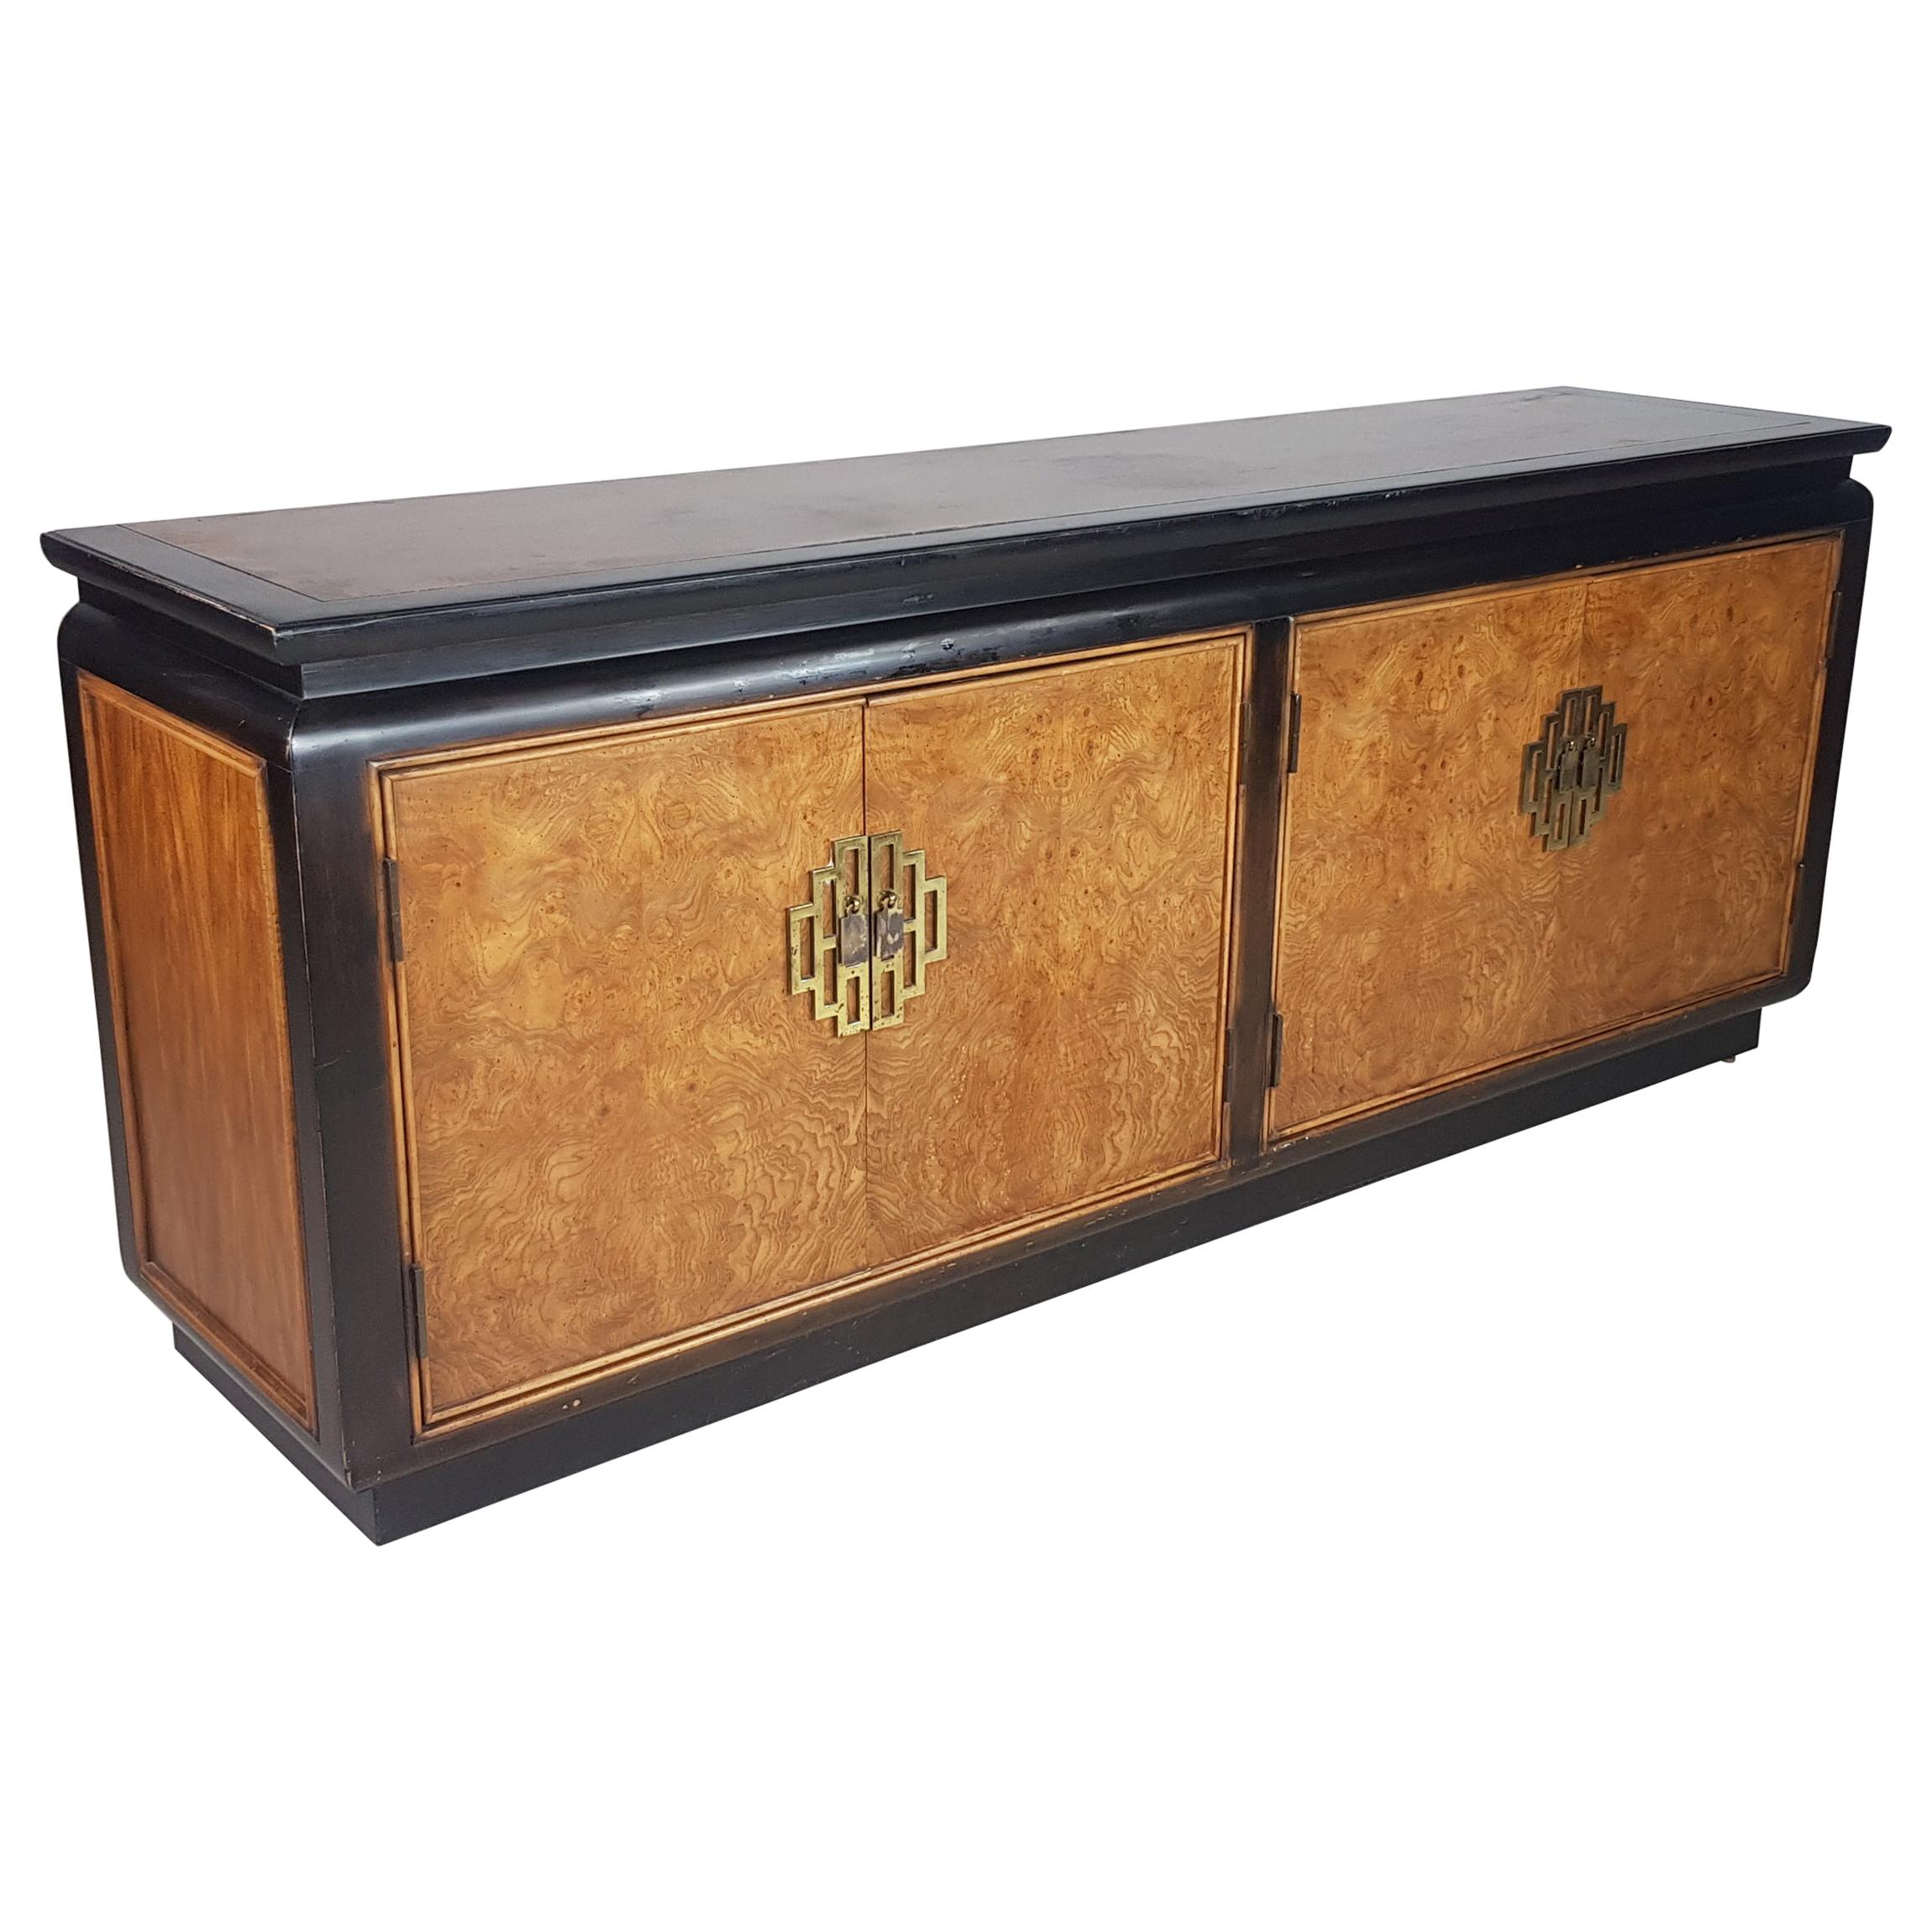 1970s Hollywood Regency Century Furniture Black Lacquer and Burl Wood Sideboard For Sale